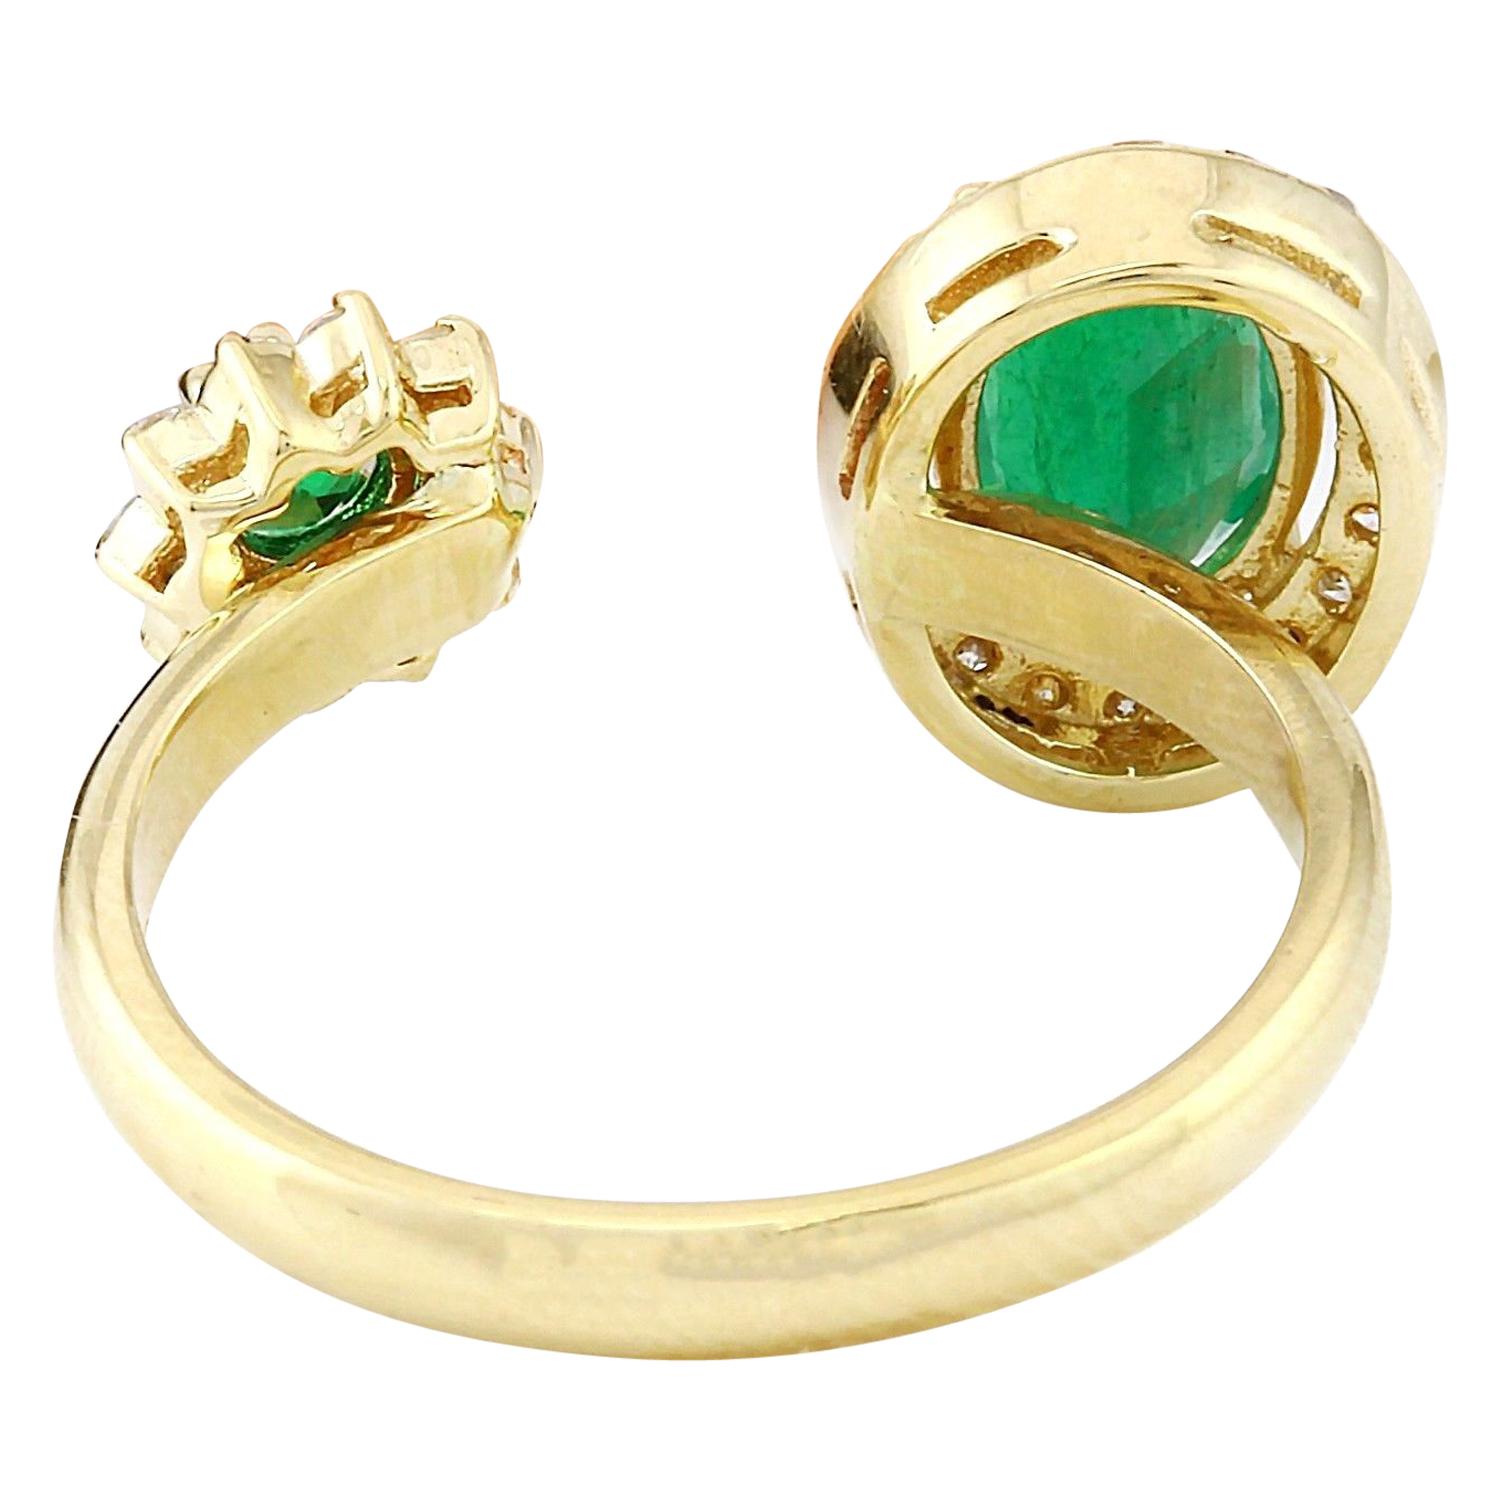 Oval Cut 1.20 Carat Natural Emerald 14 Karat Solid Yellow Gold Diamond Ring For Sale